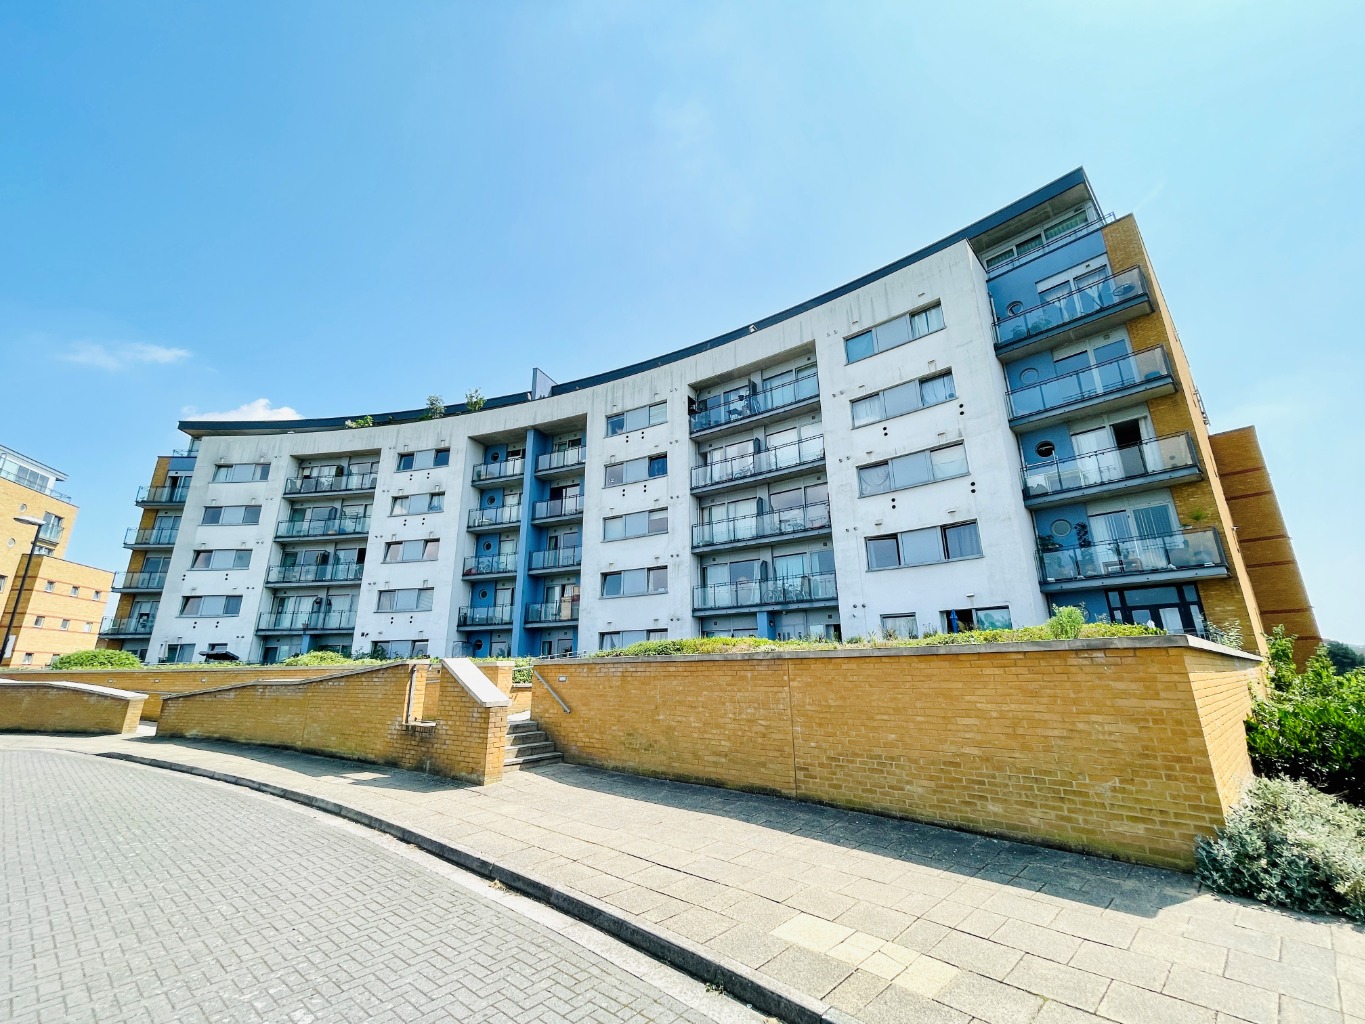 Located right by the River Thames, the flat offers very spacious accommodation, with two very good sized double bedrooms, one of which has an en-suite shower room, separate family bathroom suite, great views, double glazing, fitted kitchen and gas central heating. Offered with no forward chain.